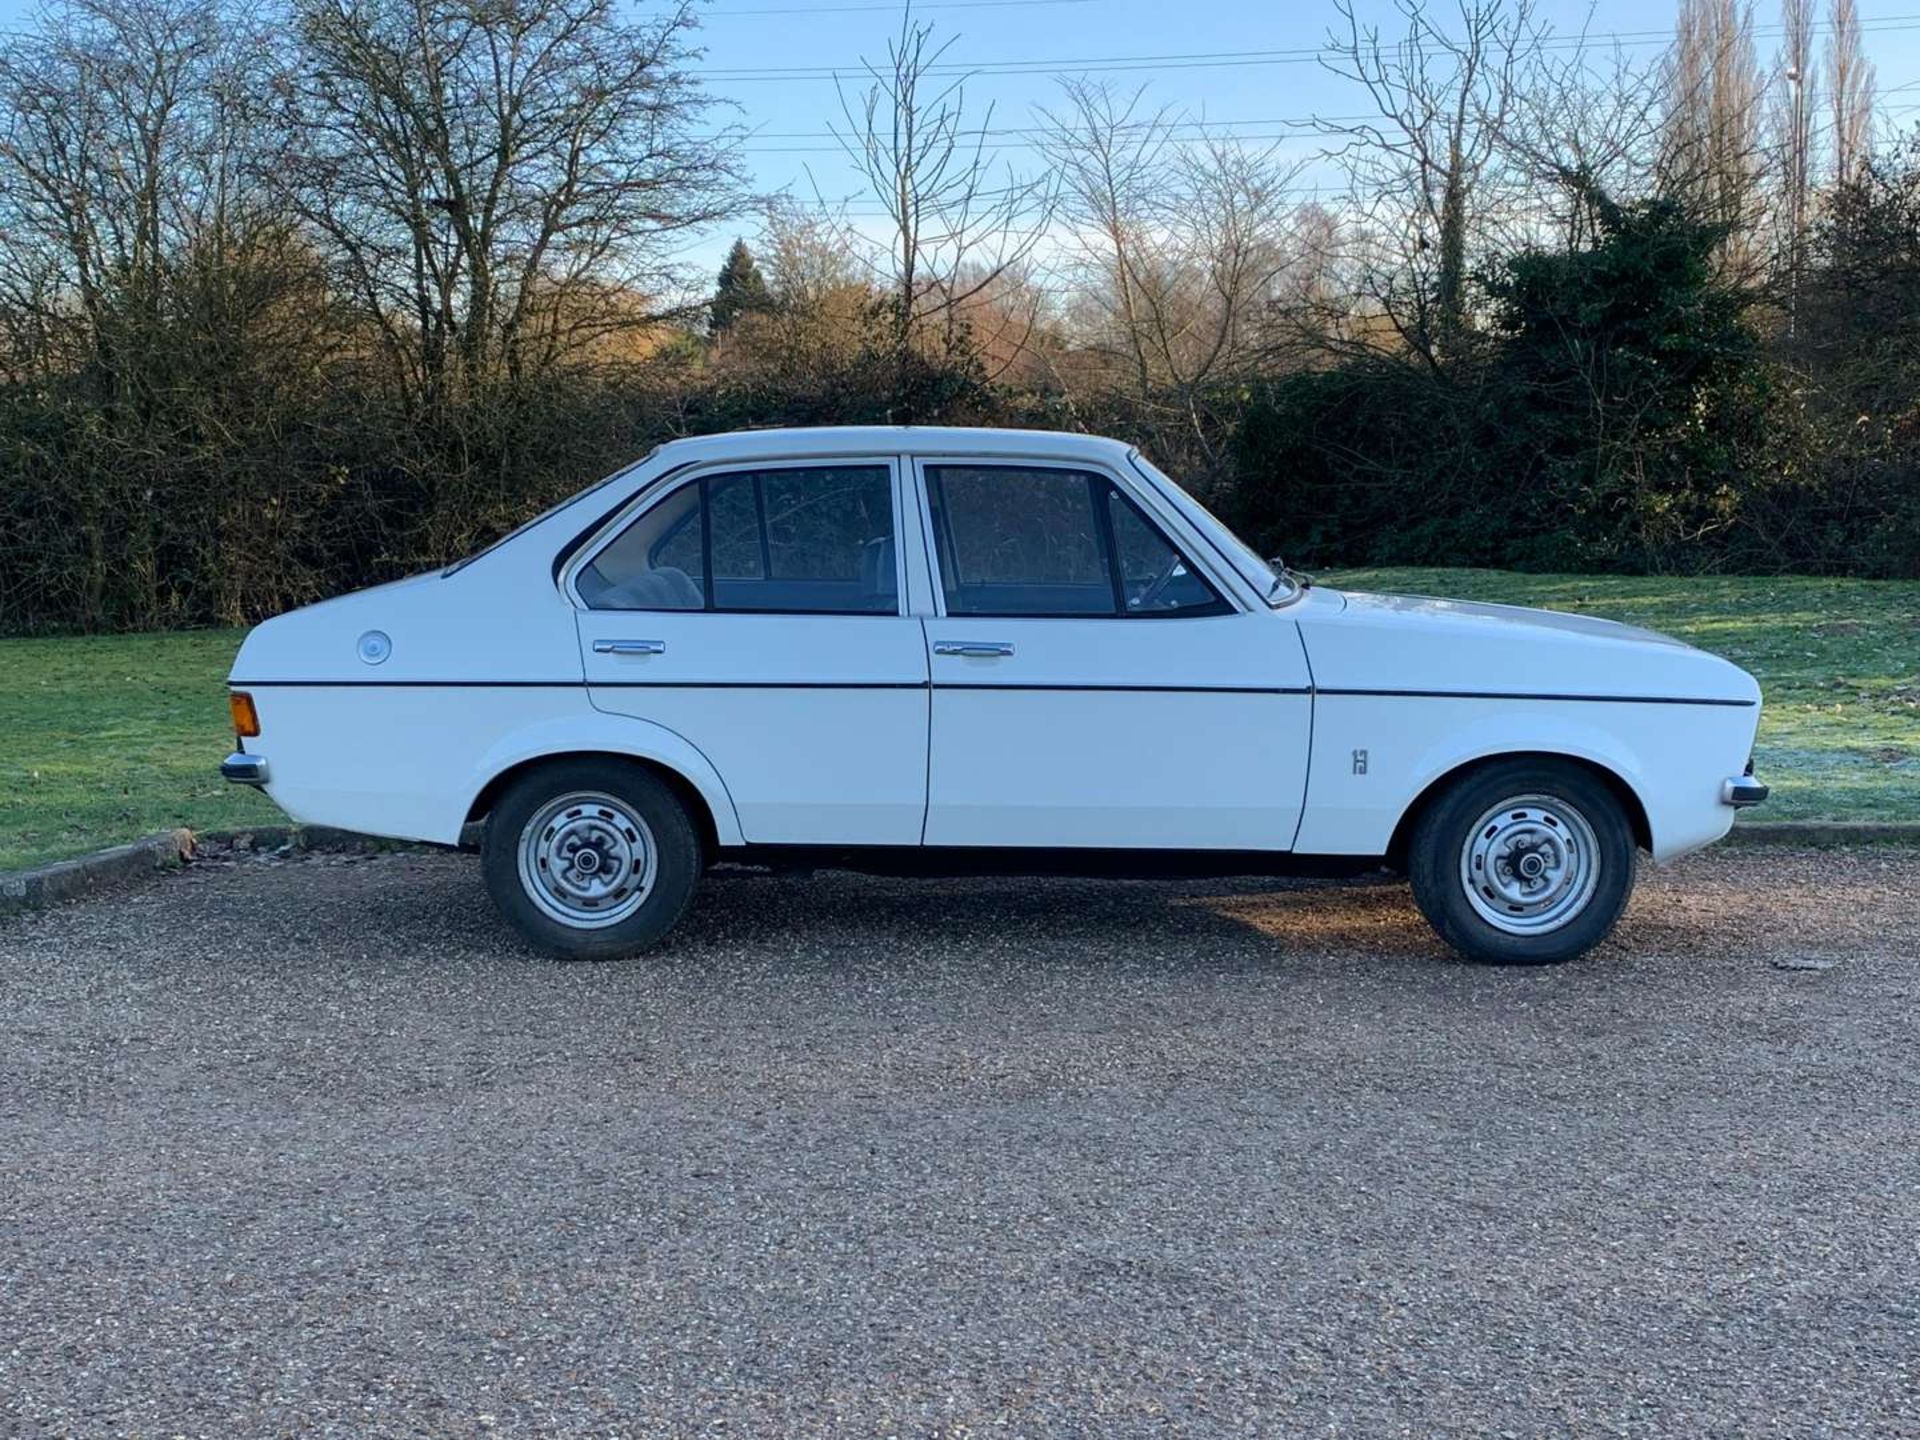 1975 FORD ESCORT GL 1.3 AUTO MKII LHD - Image 8 of 29